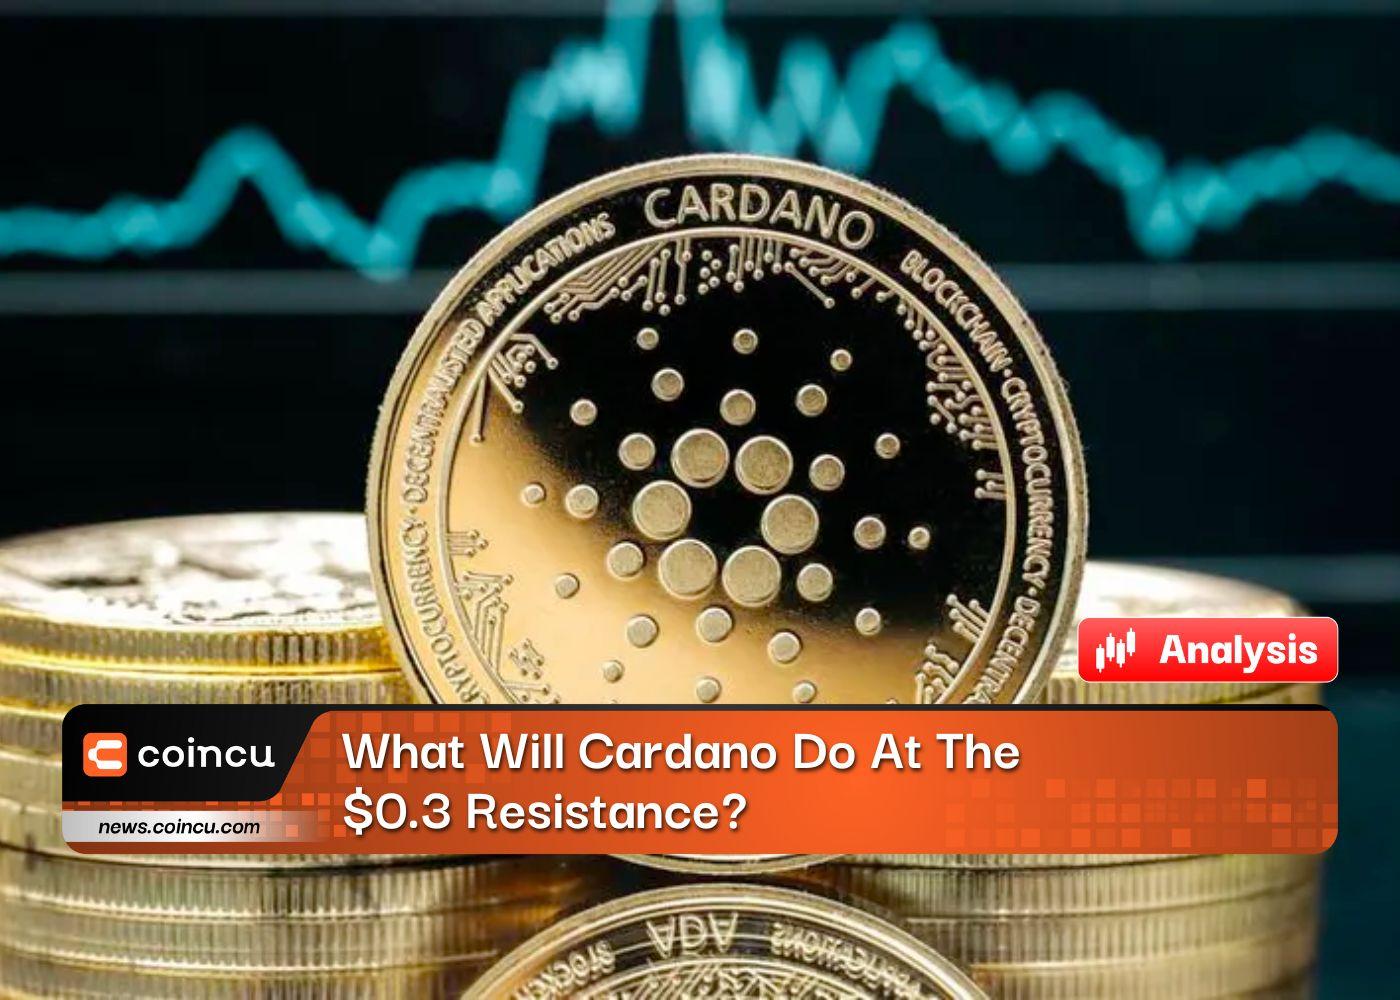 What Will Cardano Do At The $0.3 Resistance? - CoinCu News